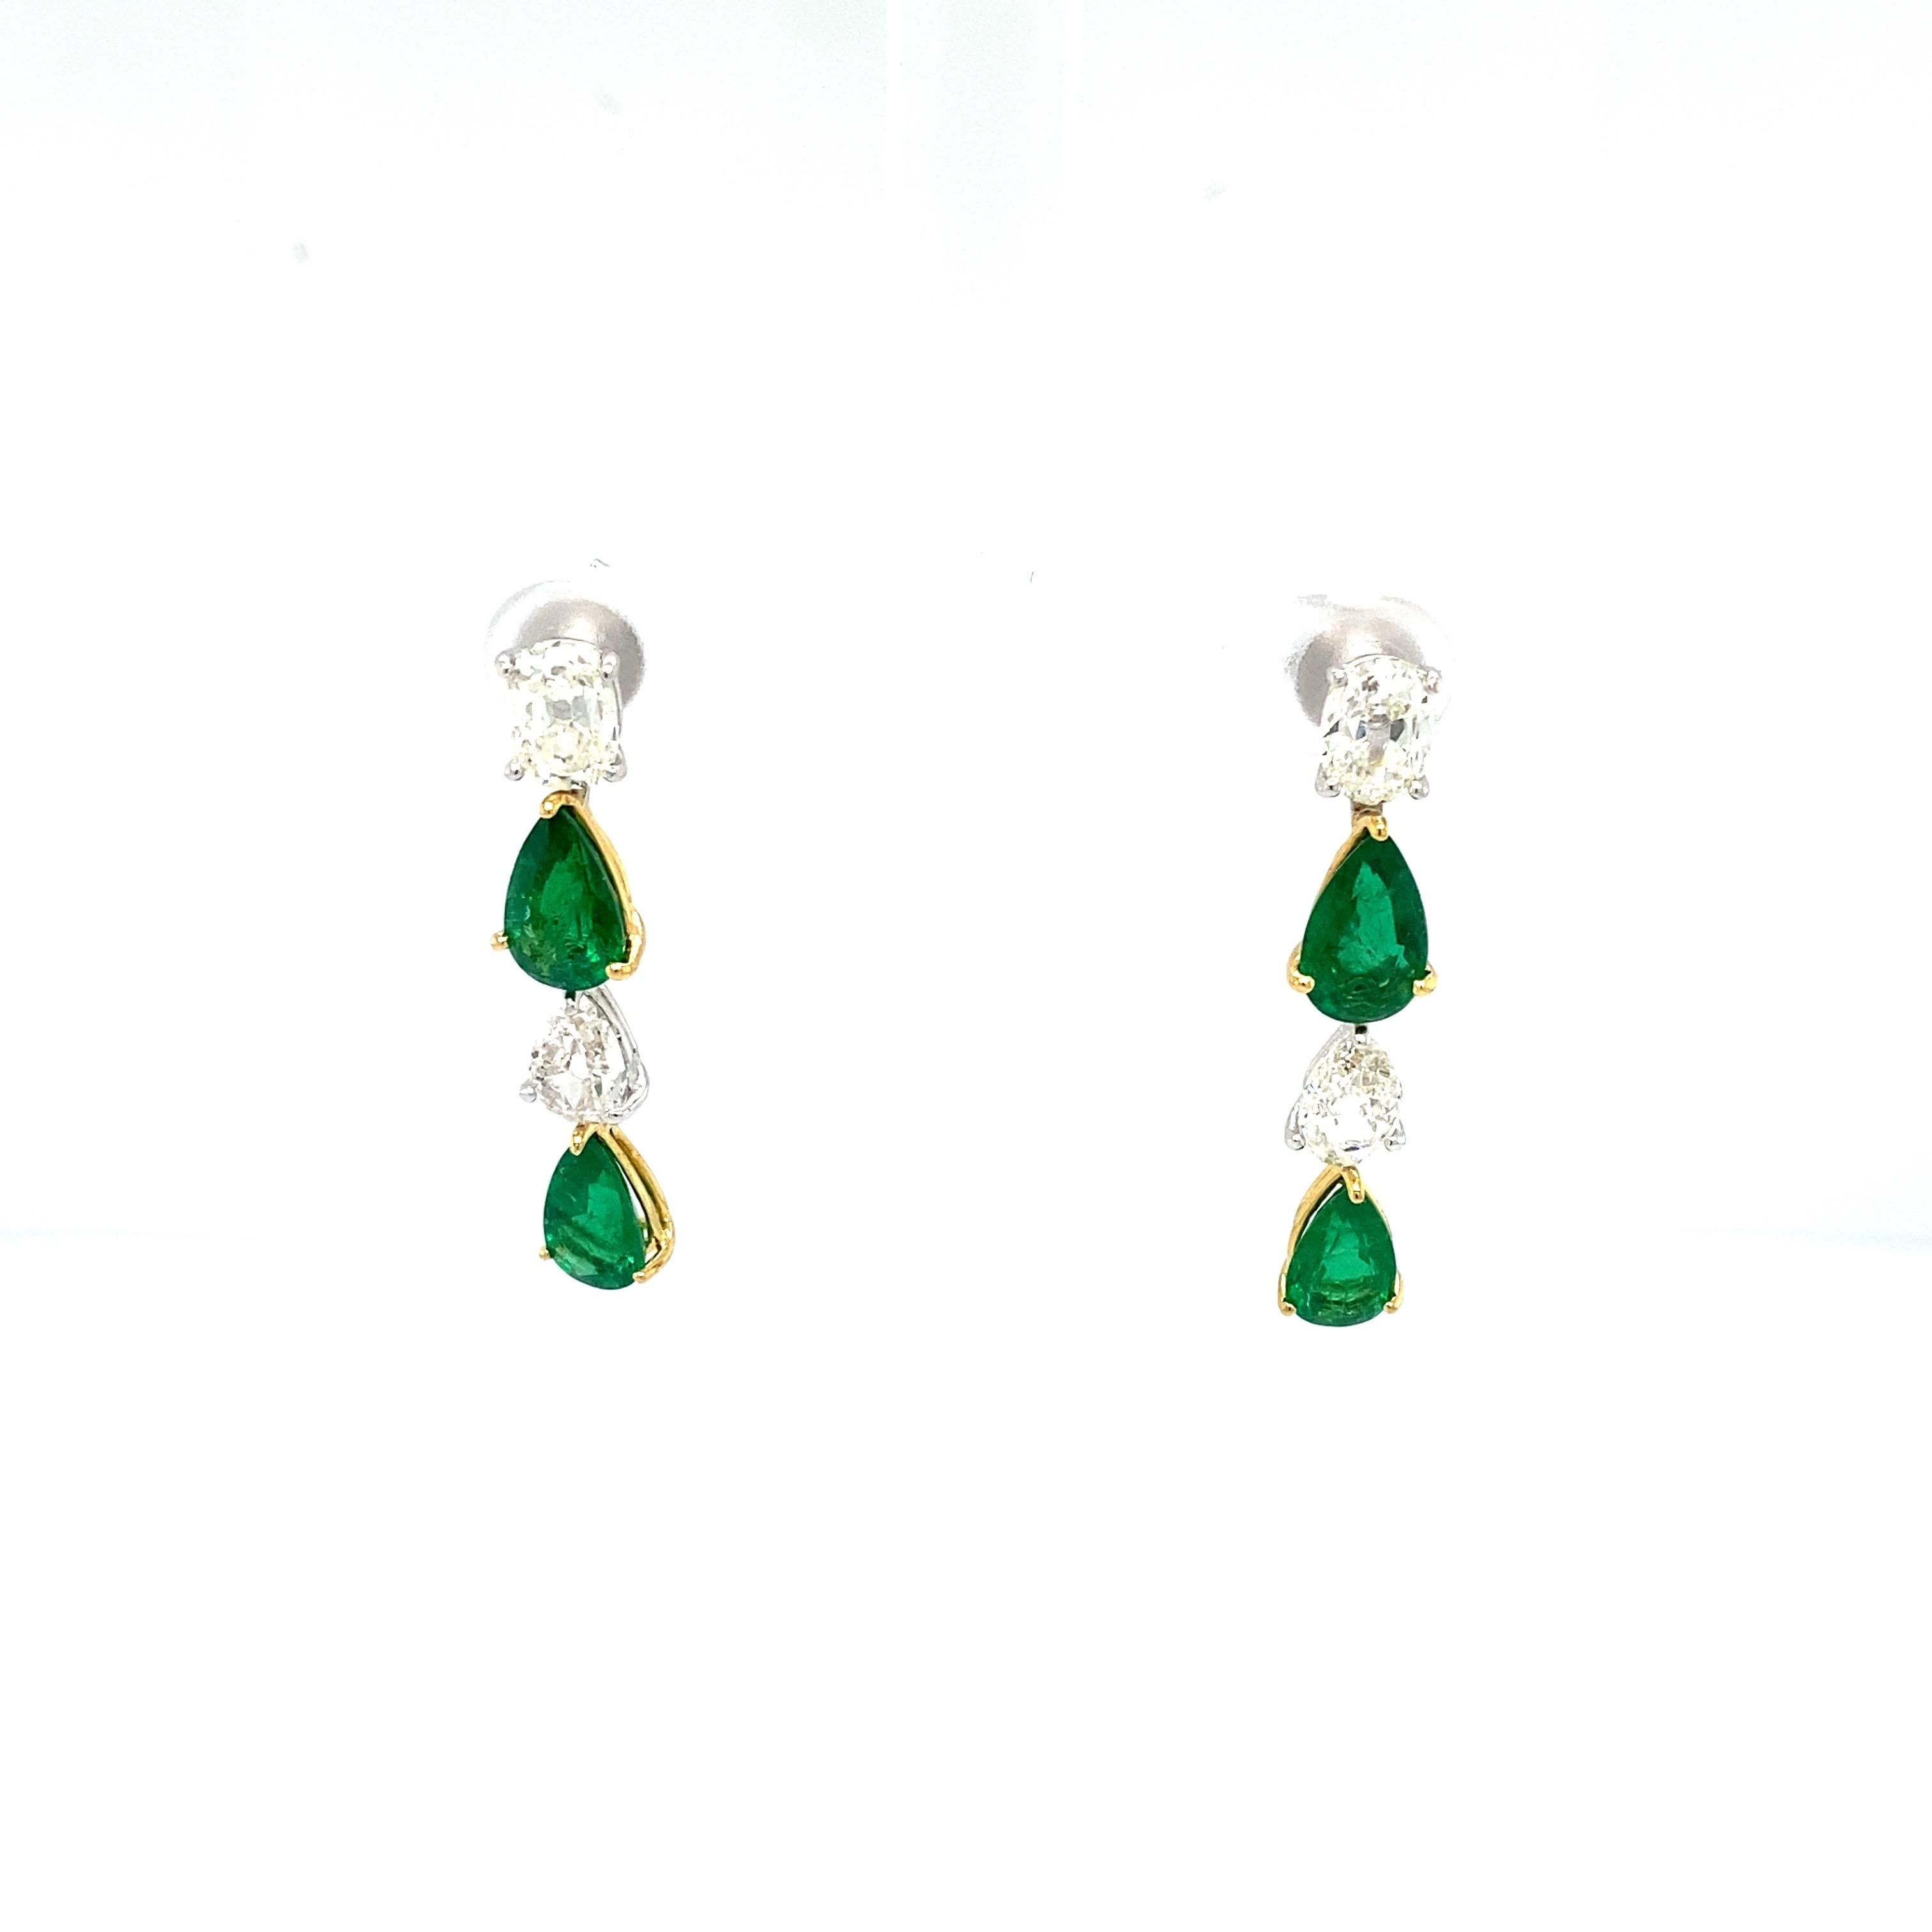 Pear Shaped Emerald and White Diamond Gold Dangle Earrings:

A very elegant pair of earrings, it features four gorgeous pear-shaped natural emeralds weighing 4.06 carat, with four white diamonds in between the gems weighing 3.34 carat. The emeralds